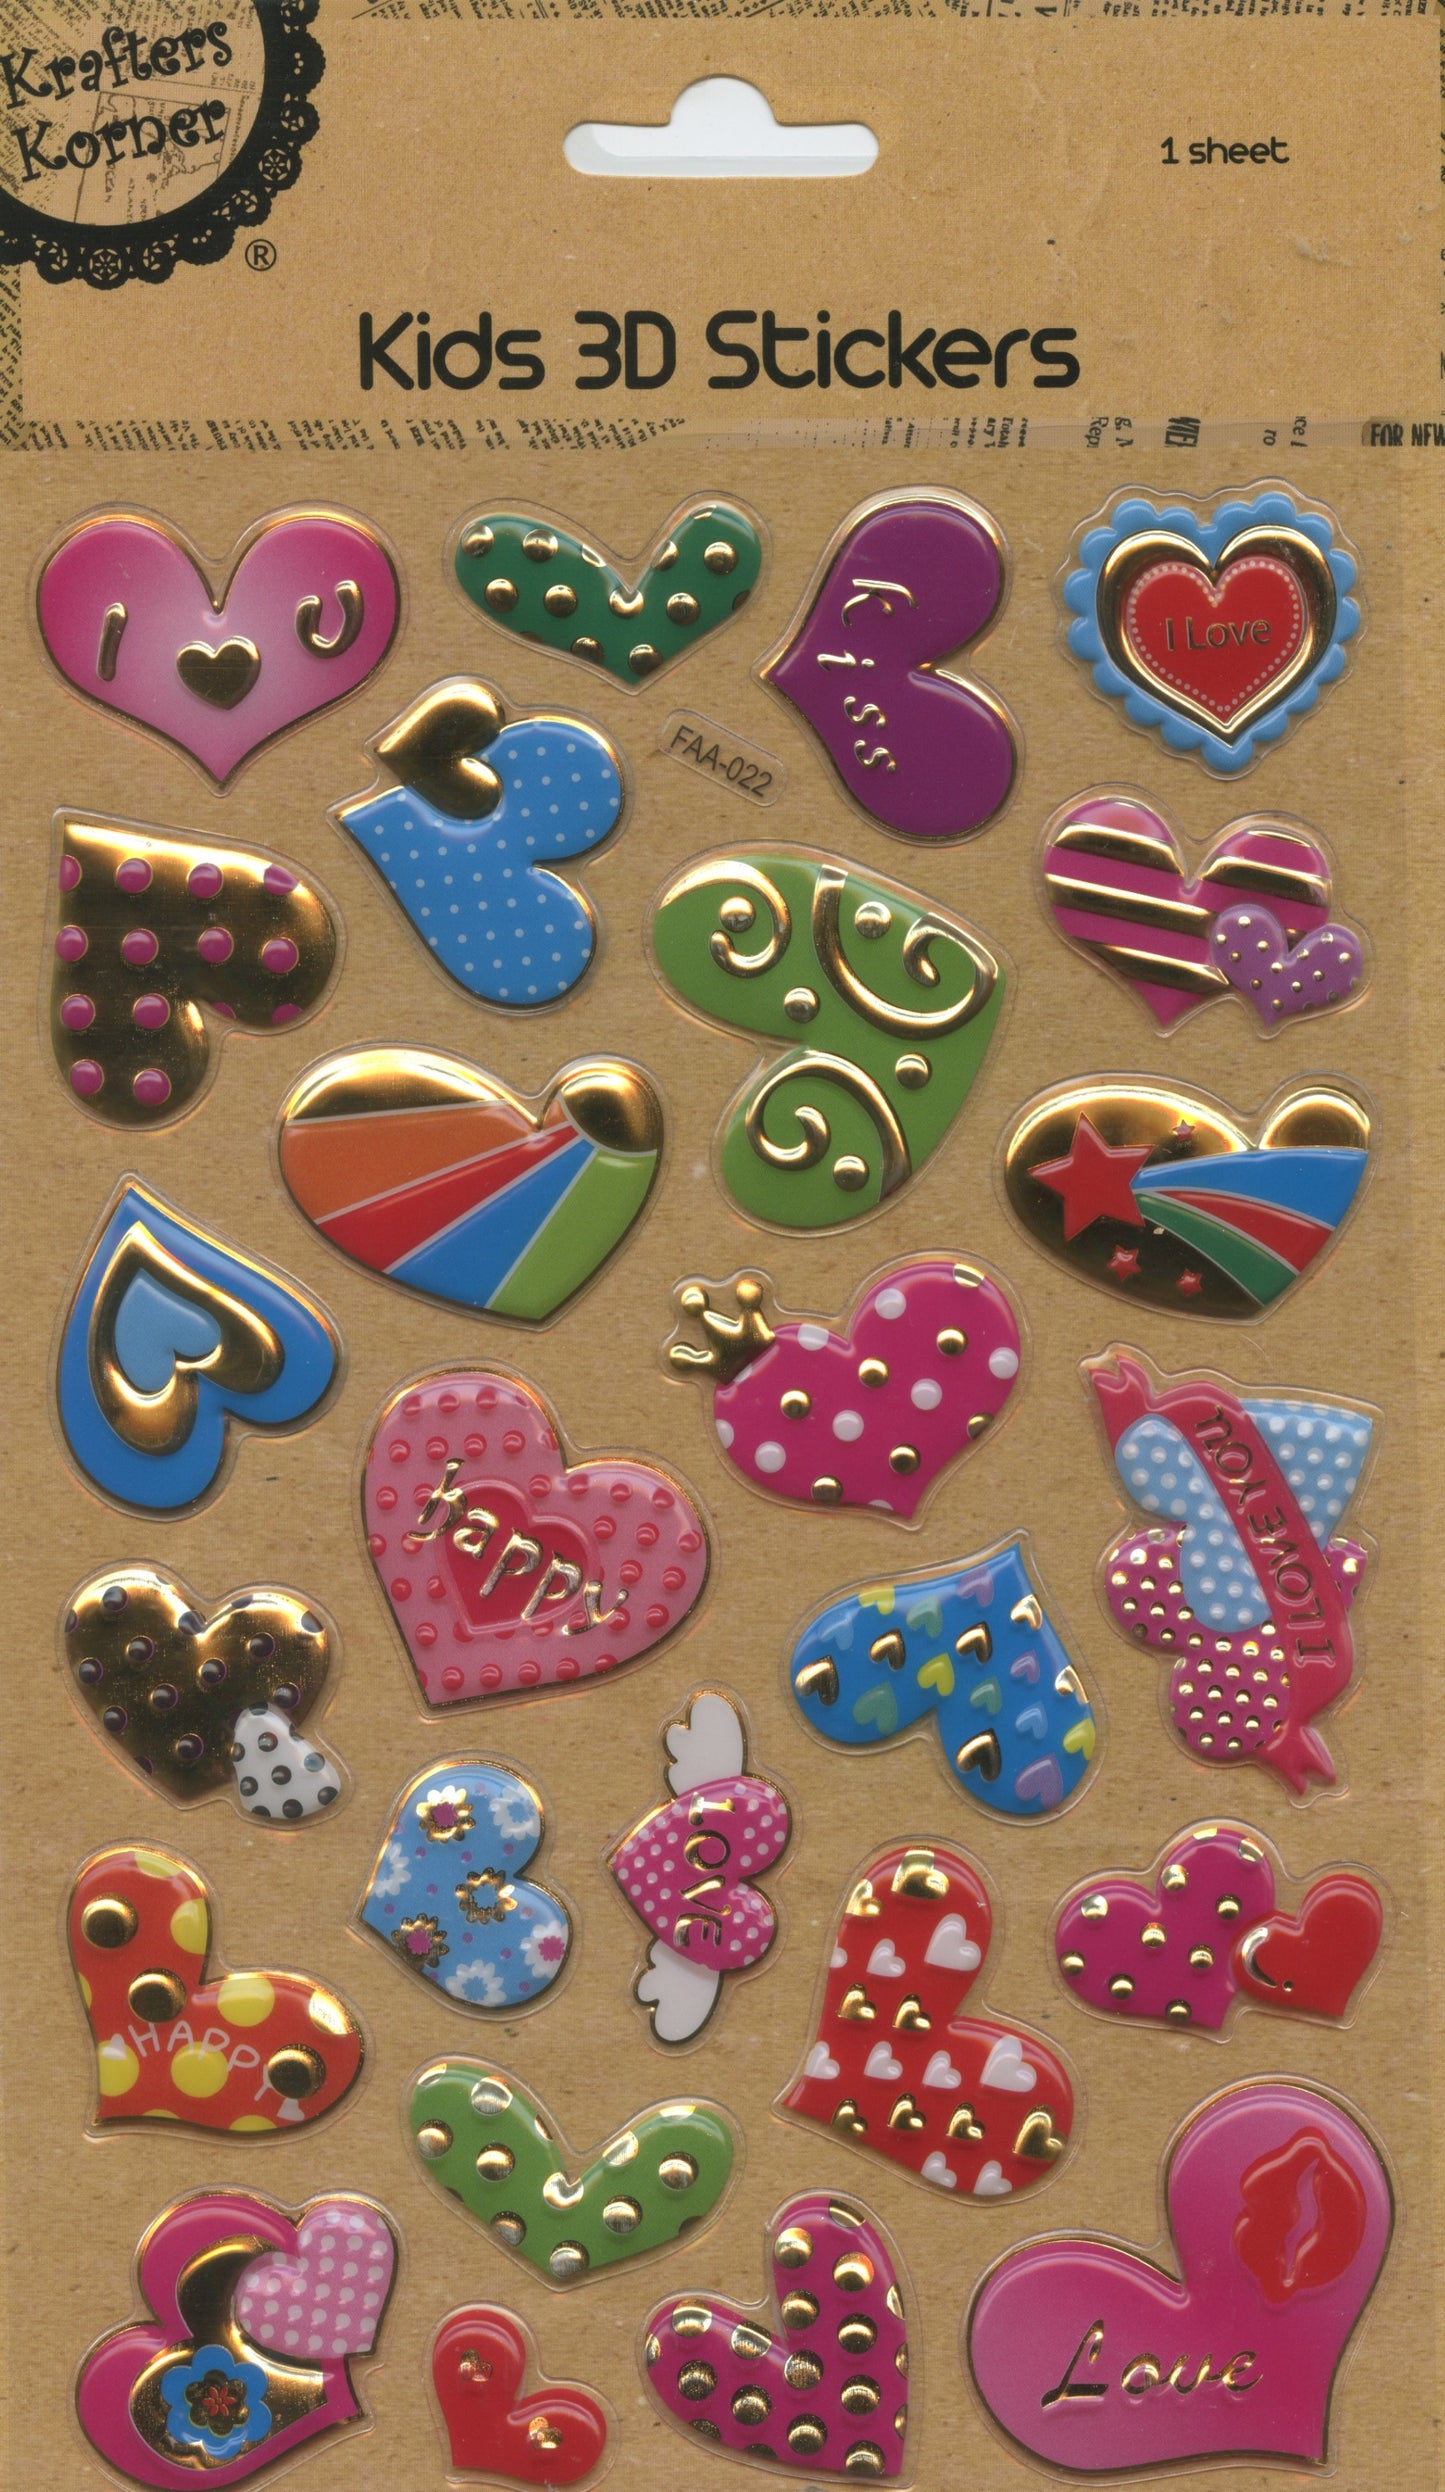 Kids 3D Puffy Stickers - 1 sheet - Hearts Packs #1 - 26 pc